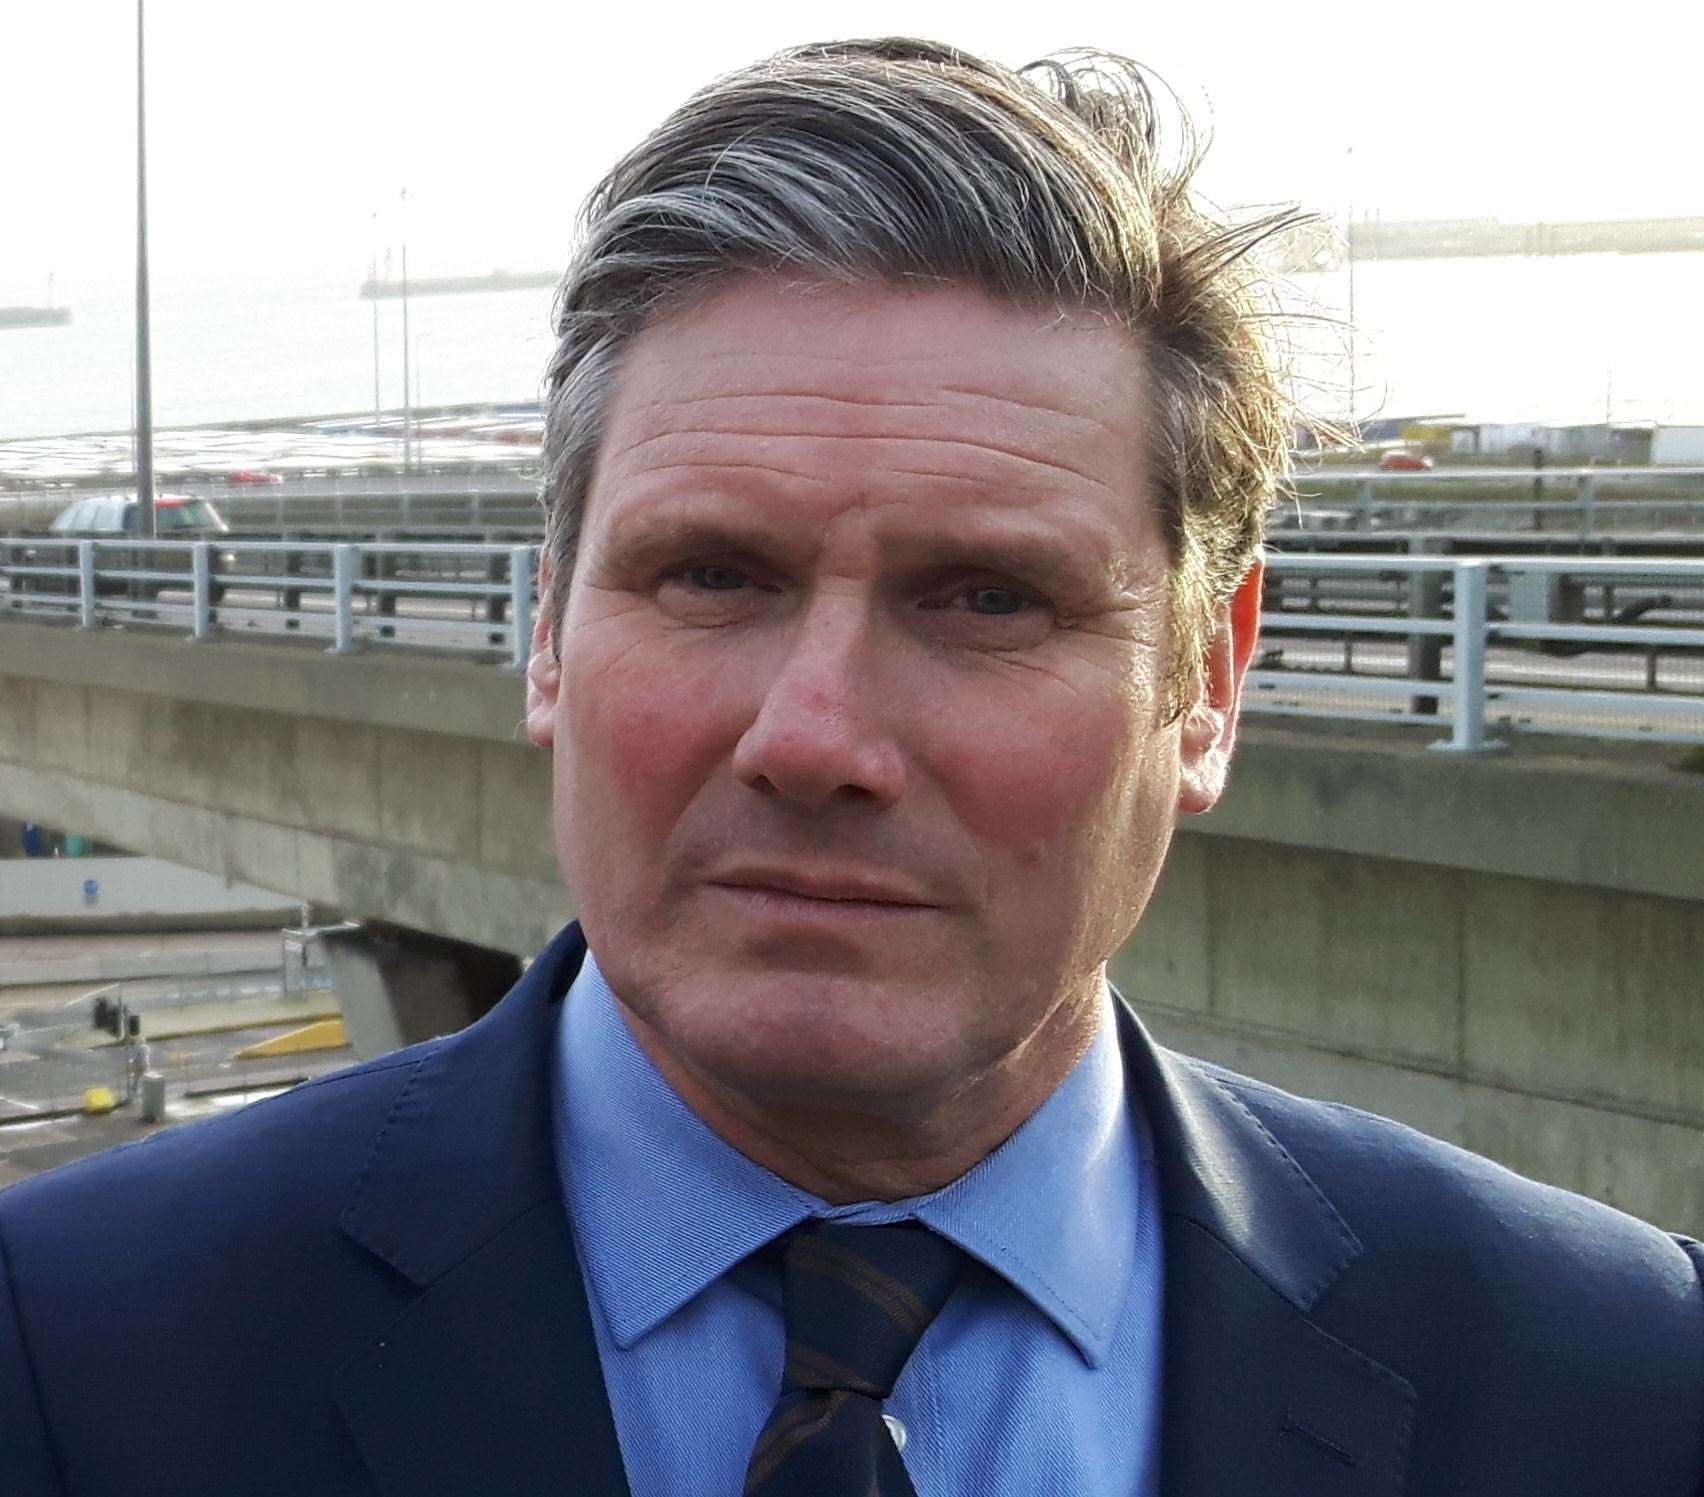 Sir Keir Starmer described the conclusions of the report as "stark"